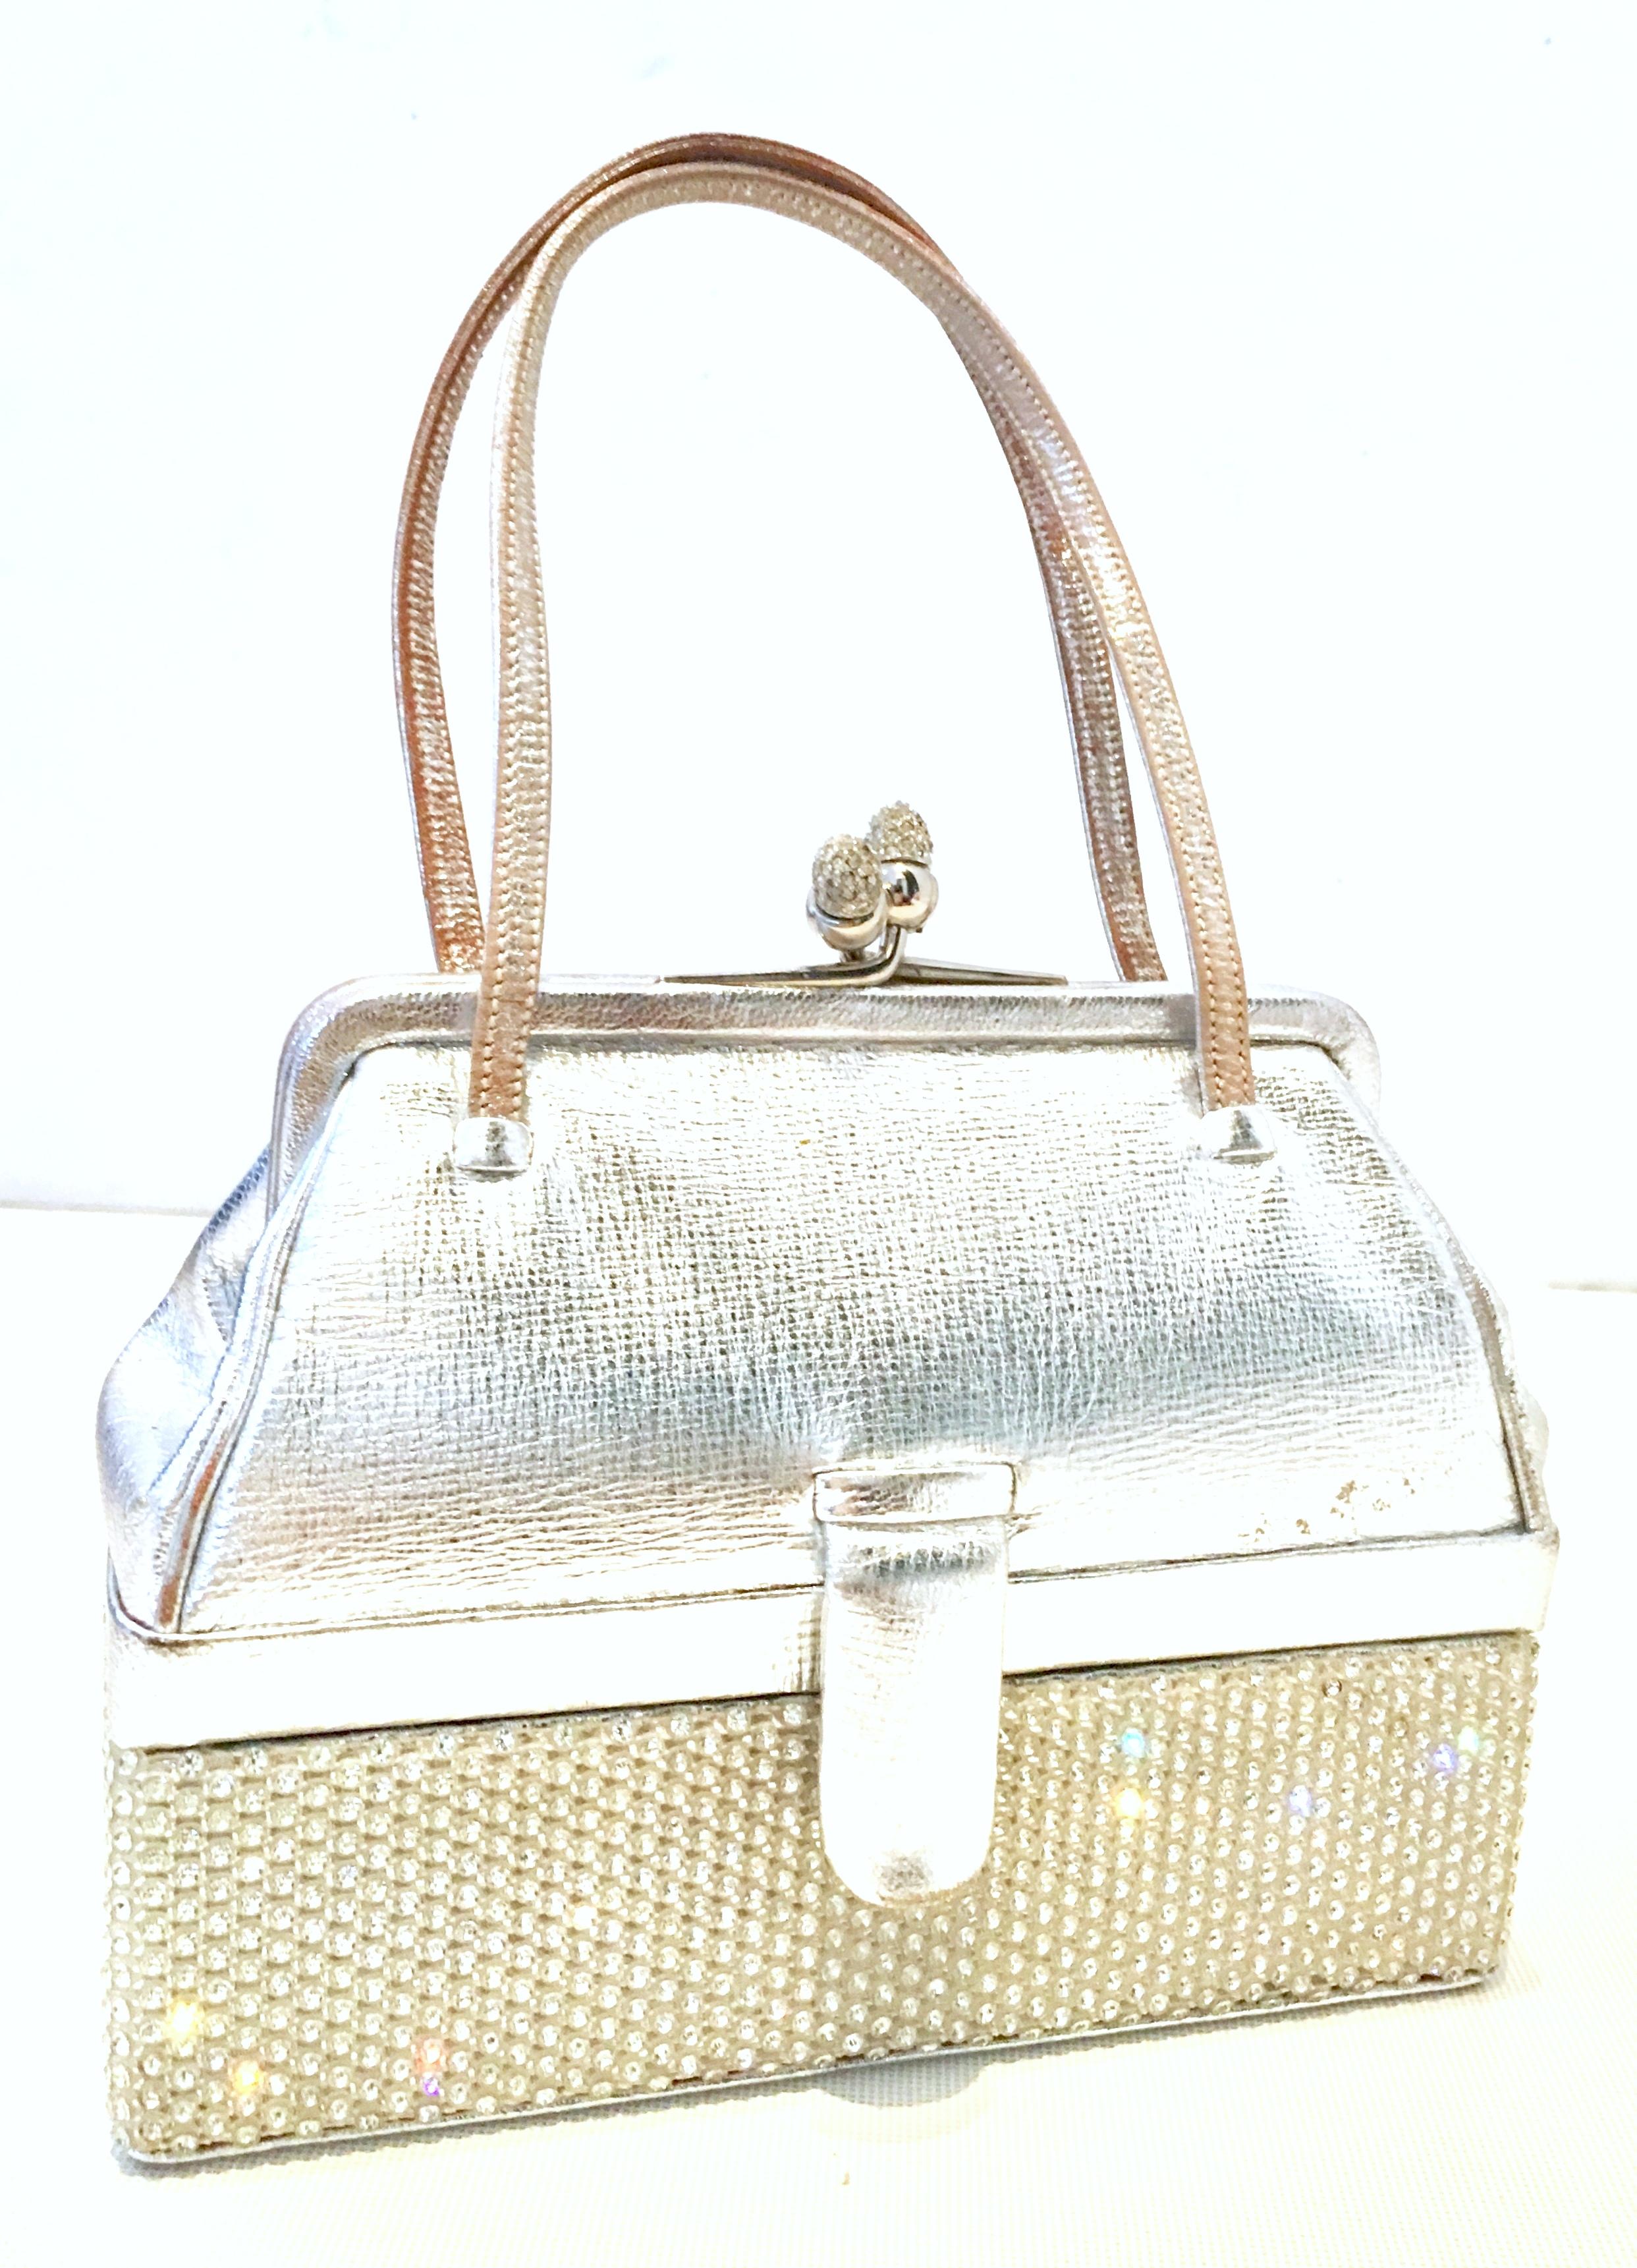 20th Century Judith Leiber Silver Metallic Python & Clear Swarovski Crystal Minaudiere evening bag. Features a Double compartment, two tier 